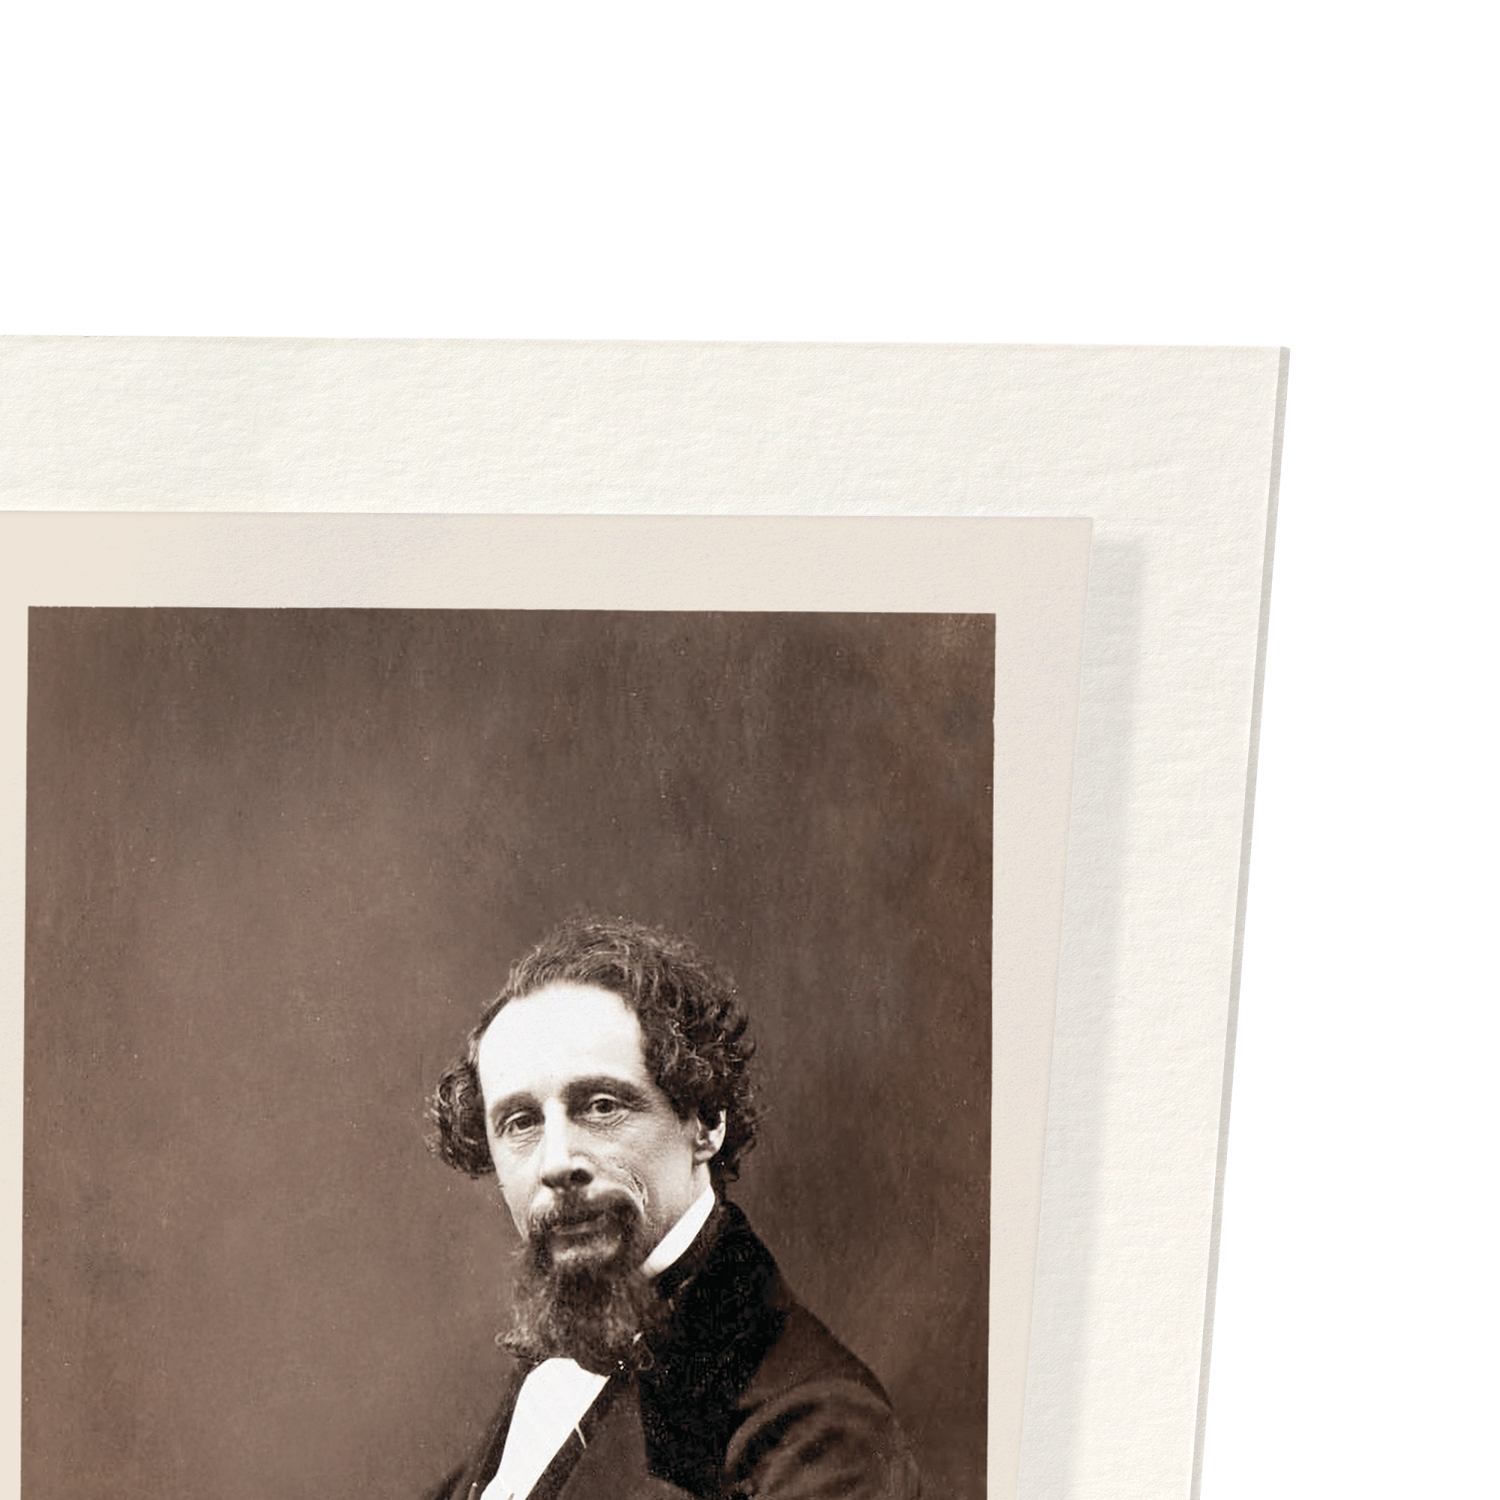 PHOTOGRAPHS OF CHARLES DICKENS: SET C (1858)